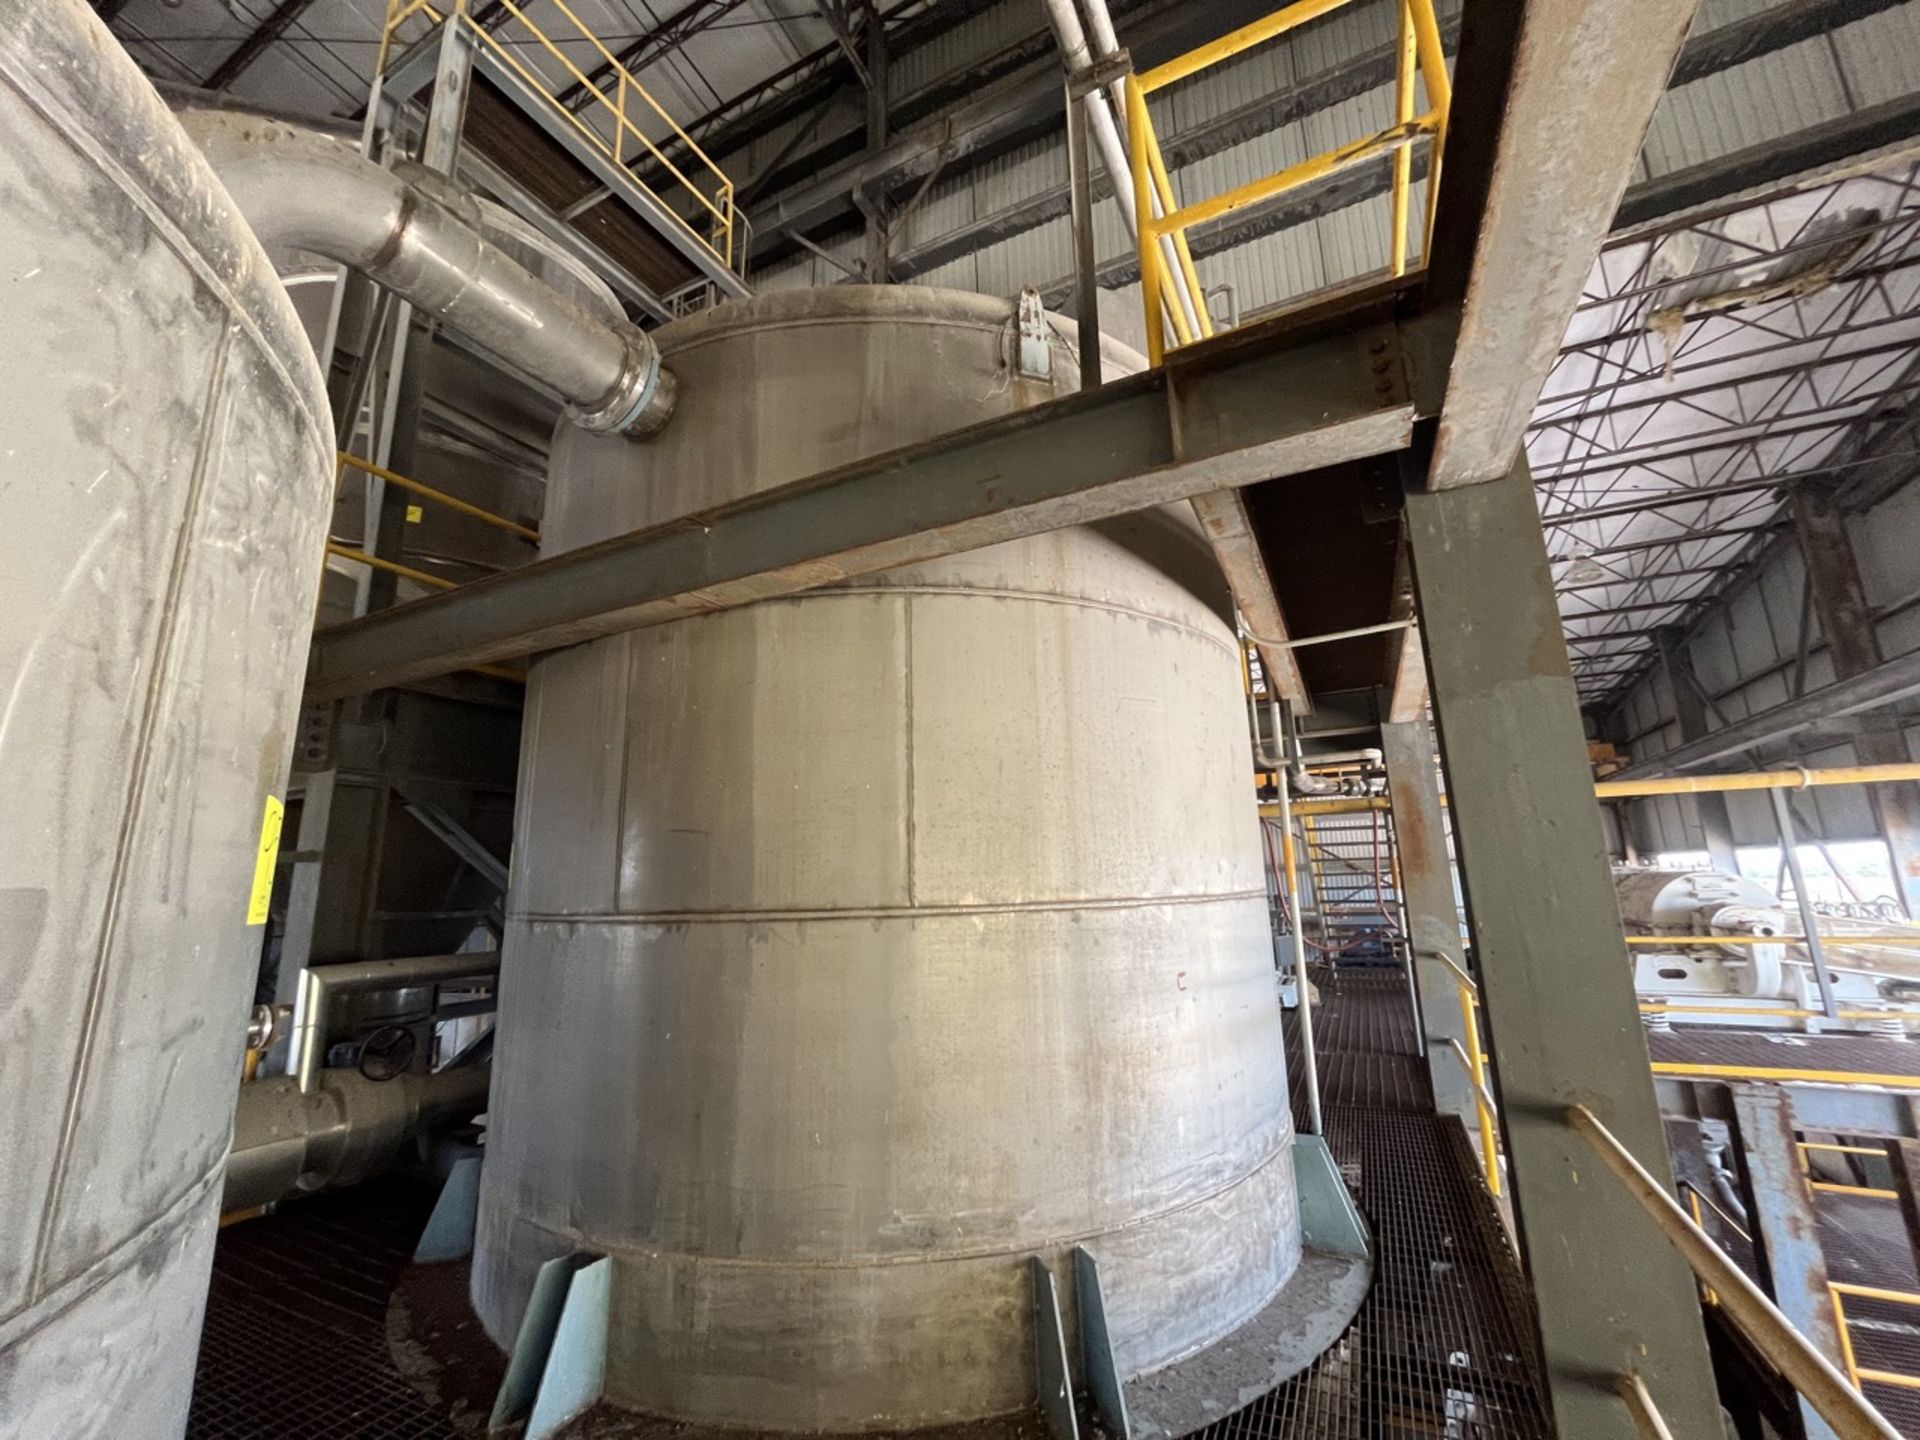 Conical storage tank with stainless steel toriesferica lid measures approximately 4.30 meters in di - Bild 21 aus 37